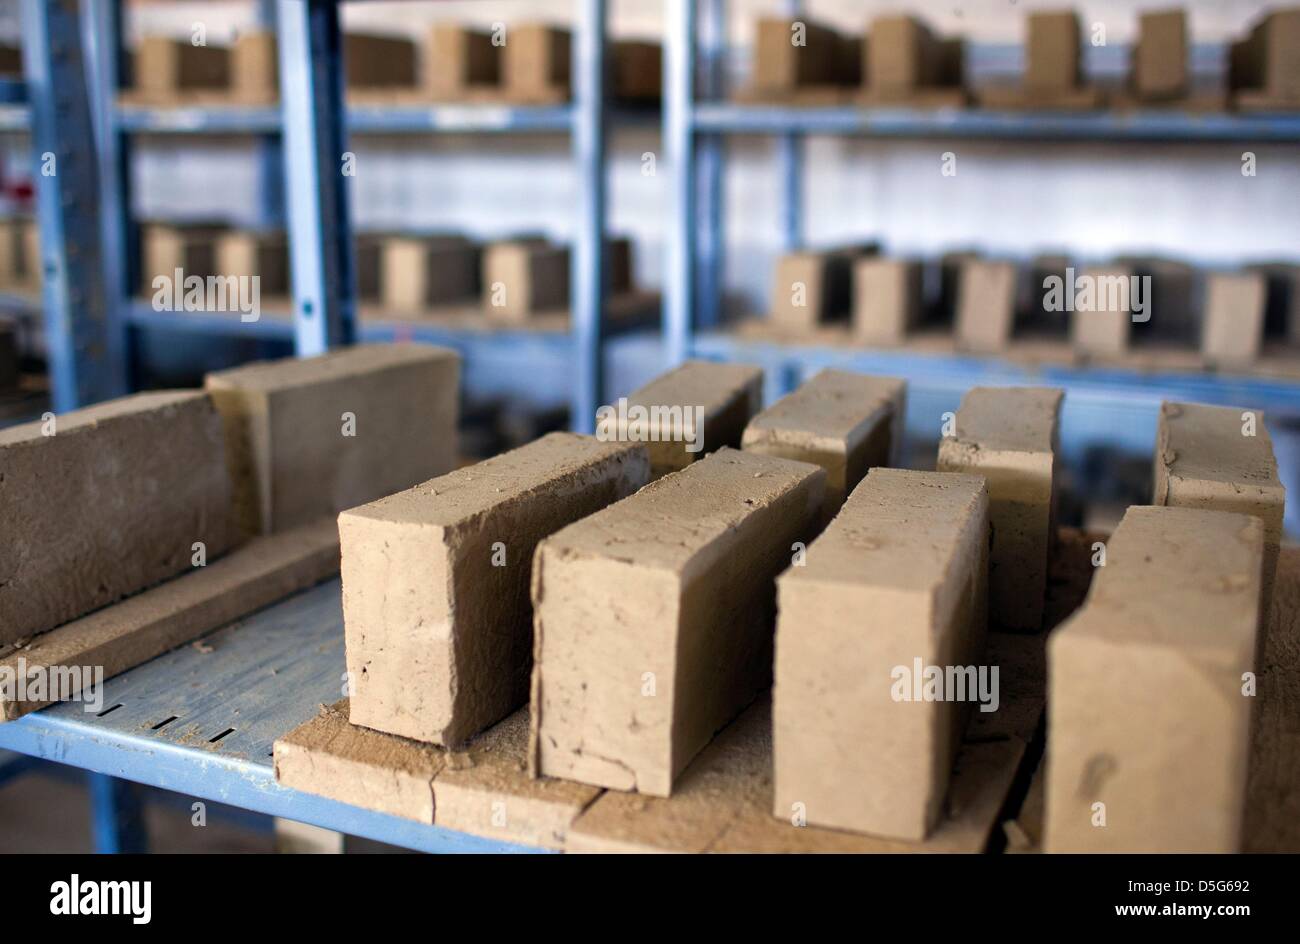 Clay bricks lie in a shelf to dry at the brick manufacture in Benzin, Germany, 26 March 2013. The more than 100 year old plant has been restaured in recent years and now prodcues bricks, sheets and plasters from clay according to old techniques. As a living museum it informs visitors about the traditions of once more than 400 brickyards in Mecklenburg. Photo: Jens Buettner Stock Photo